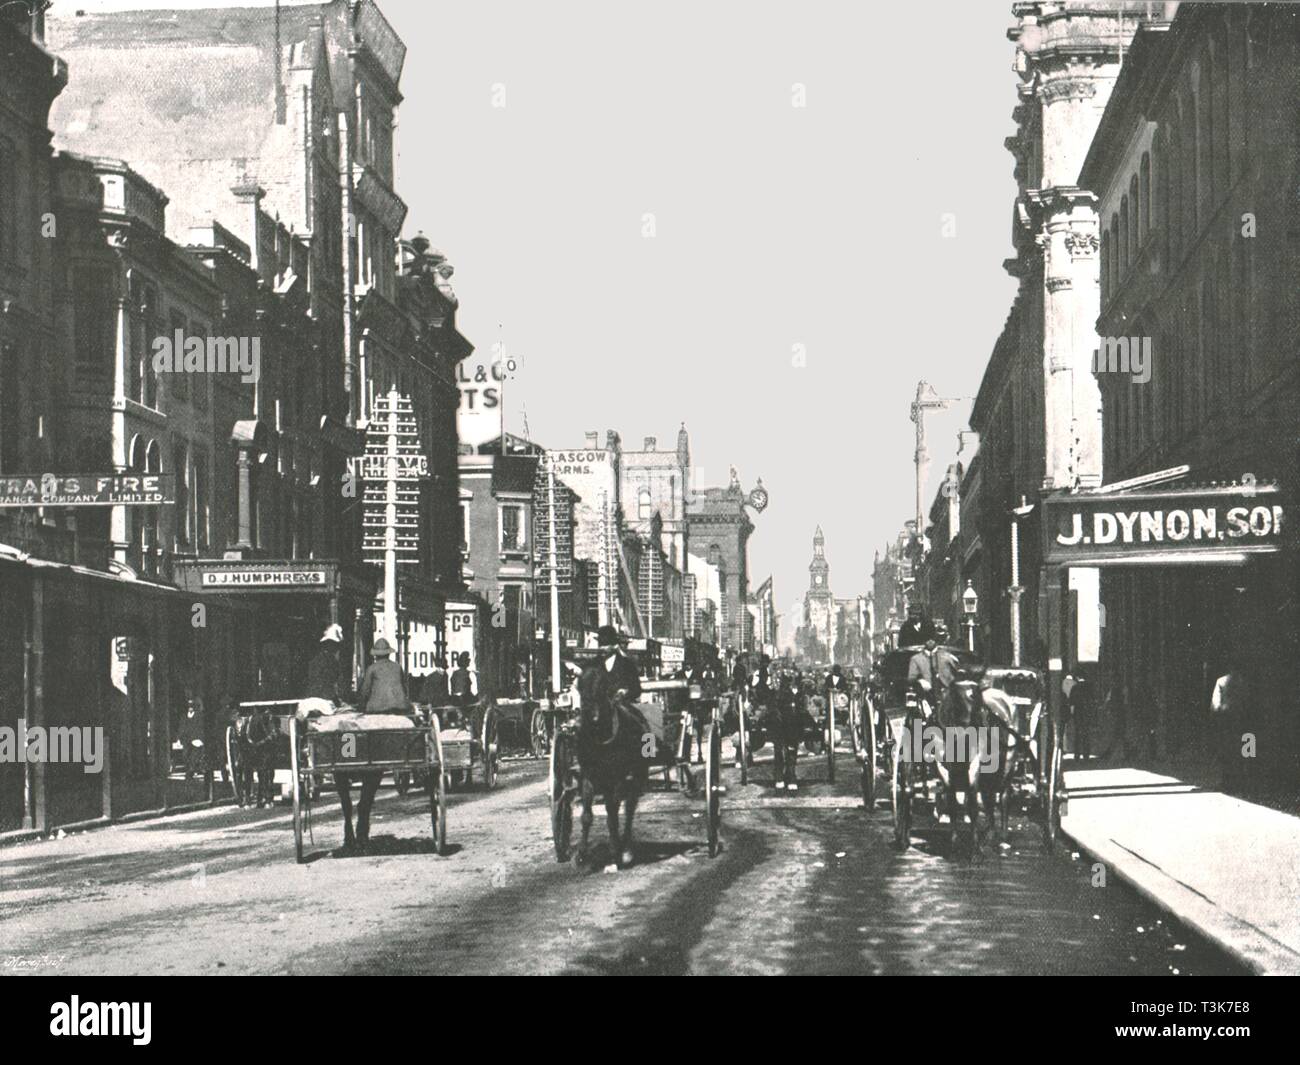 View of George Street in Downtown Sydney, Australia. Editorial Image -  Image of business, landmark: 211736280